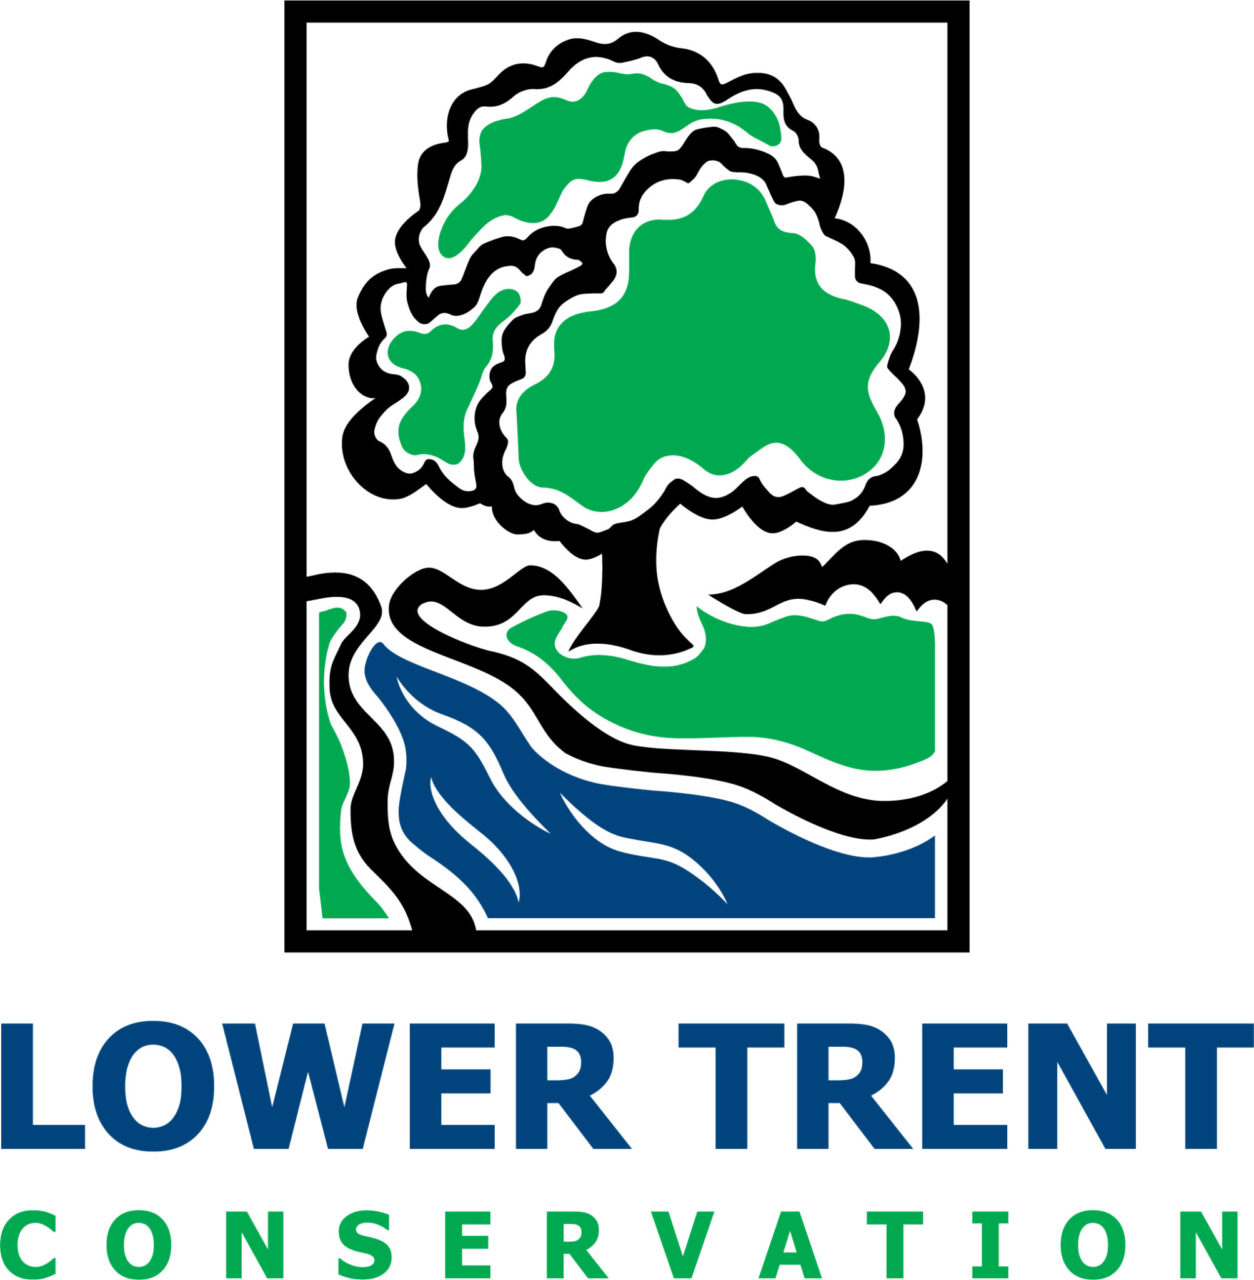 Lower Trent Conservation